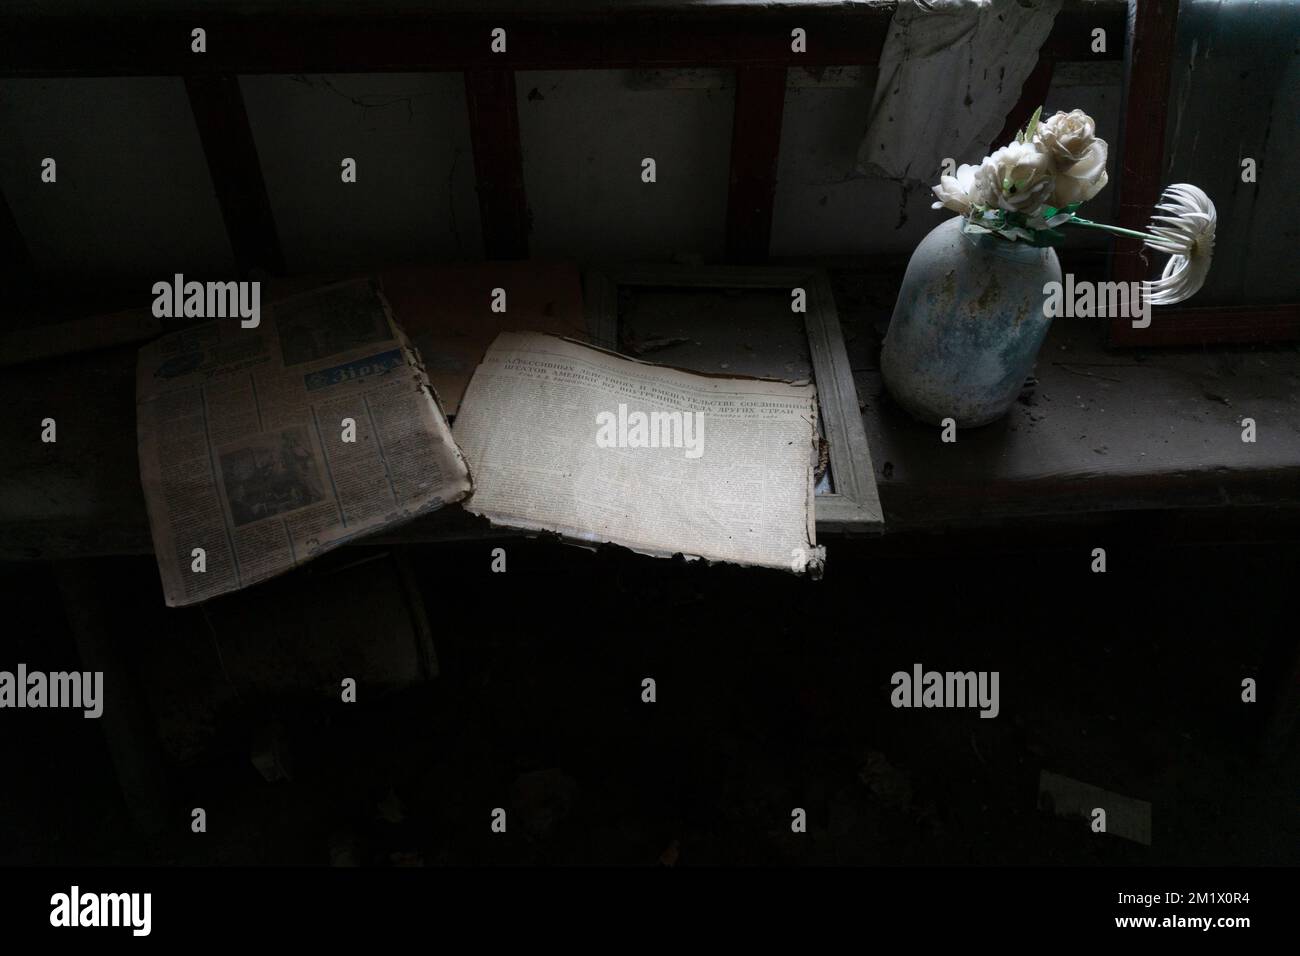 Old books and magazines with flowers over wooden table at chernobyl exclusion zone Stock Photo